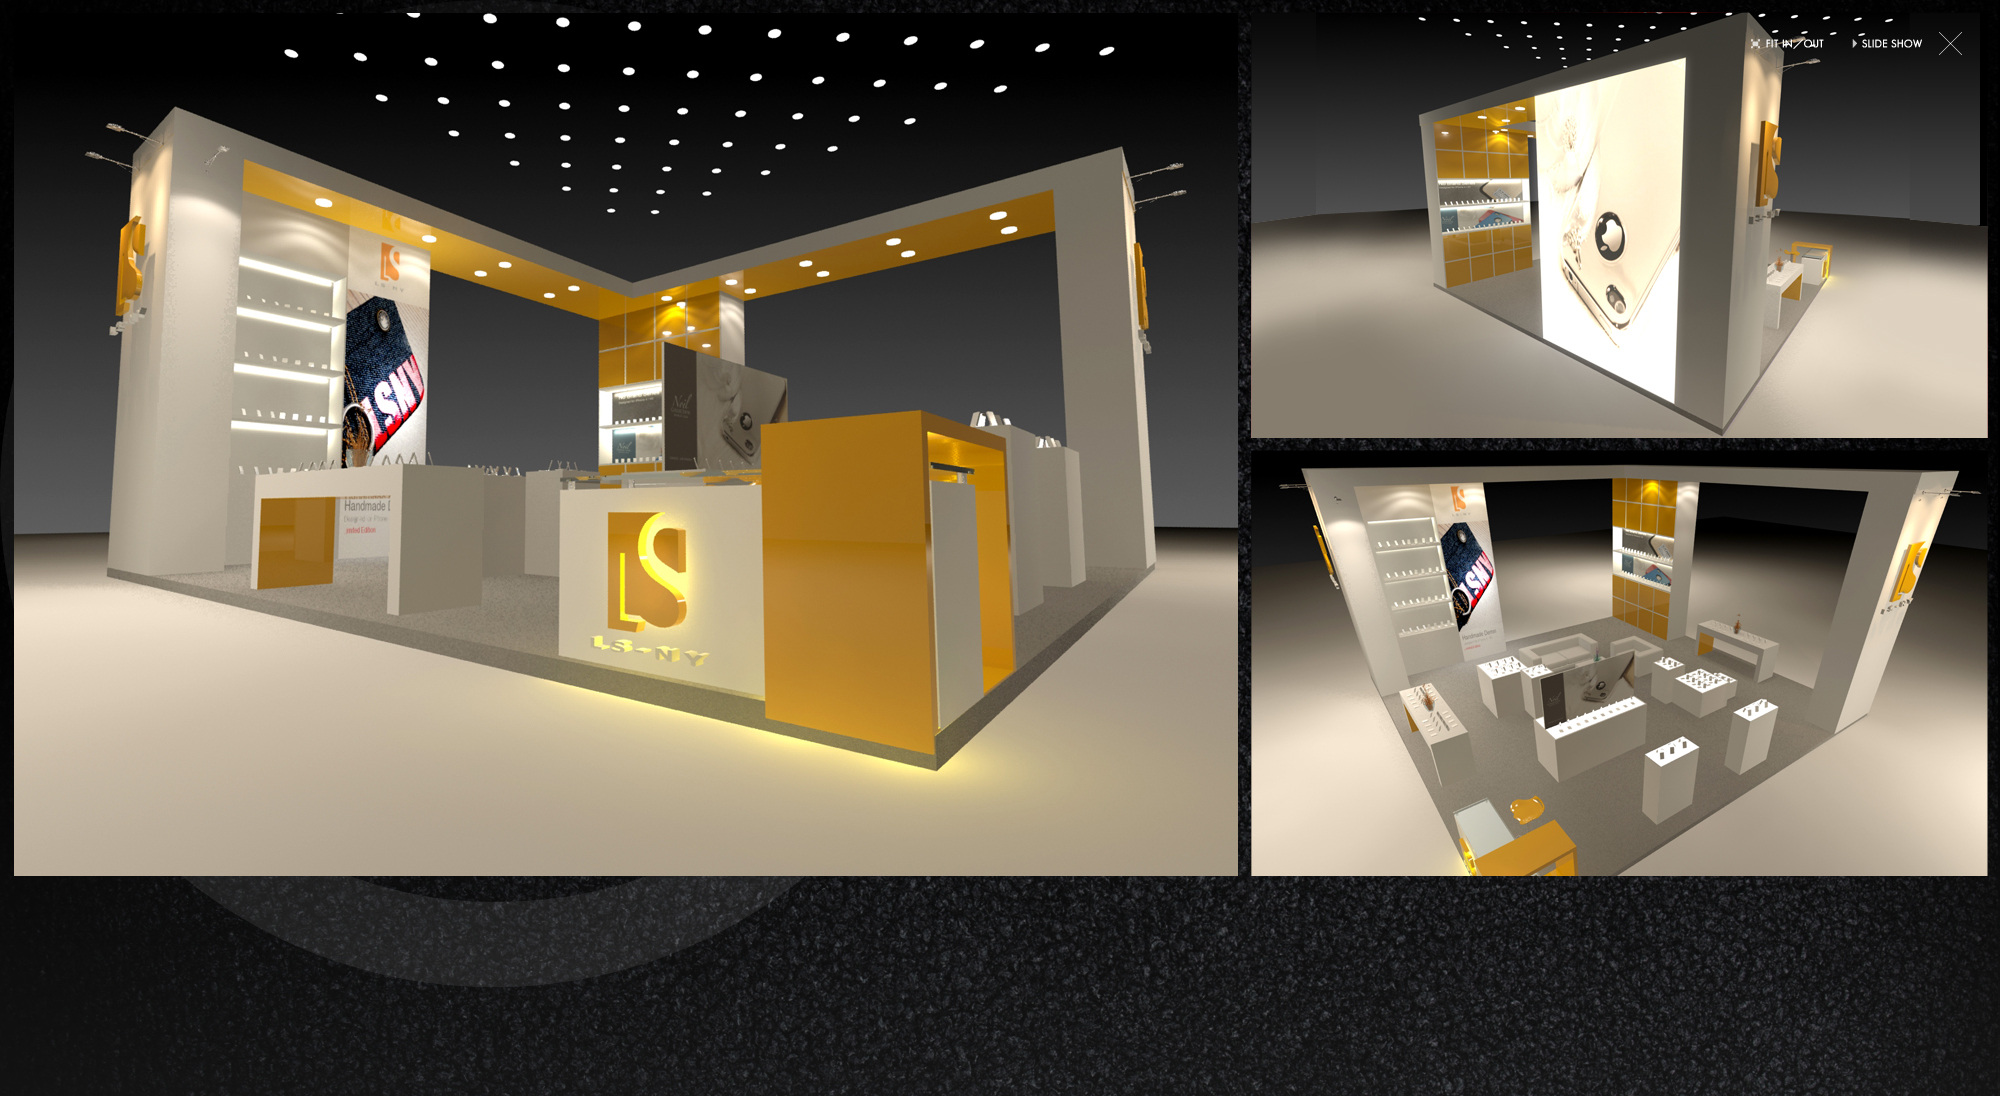 LS-NY - Raw Space Booth Design